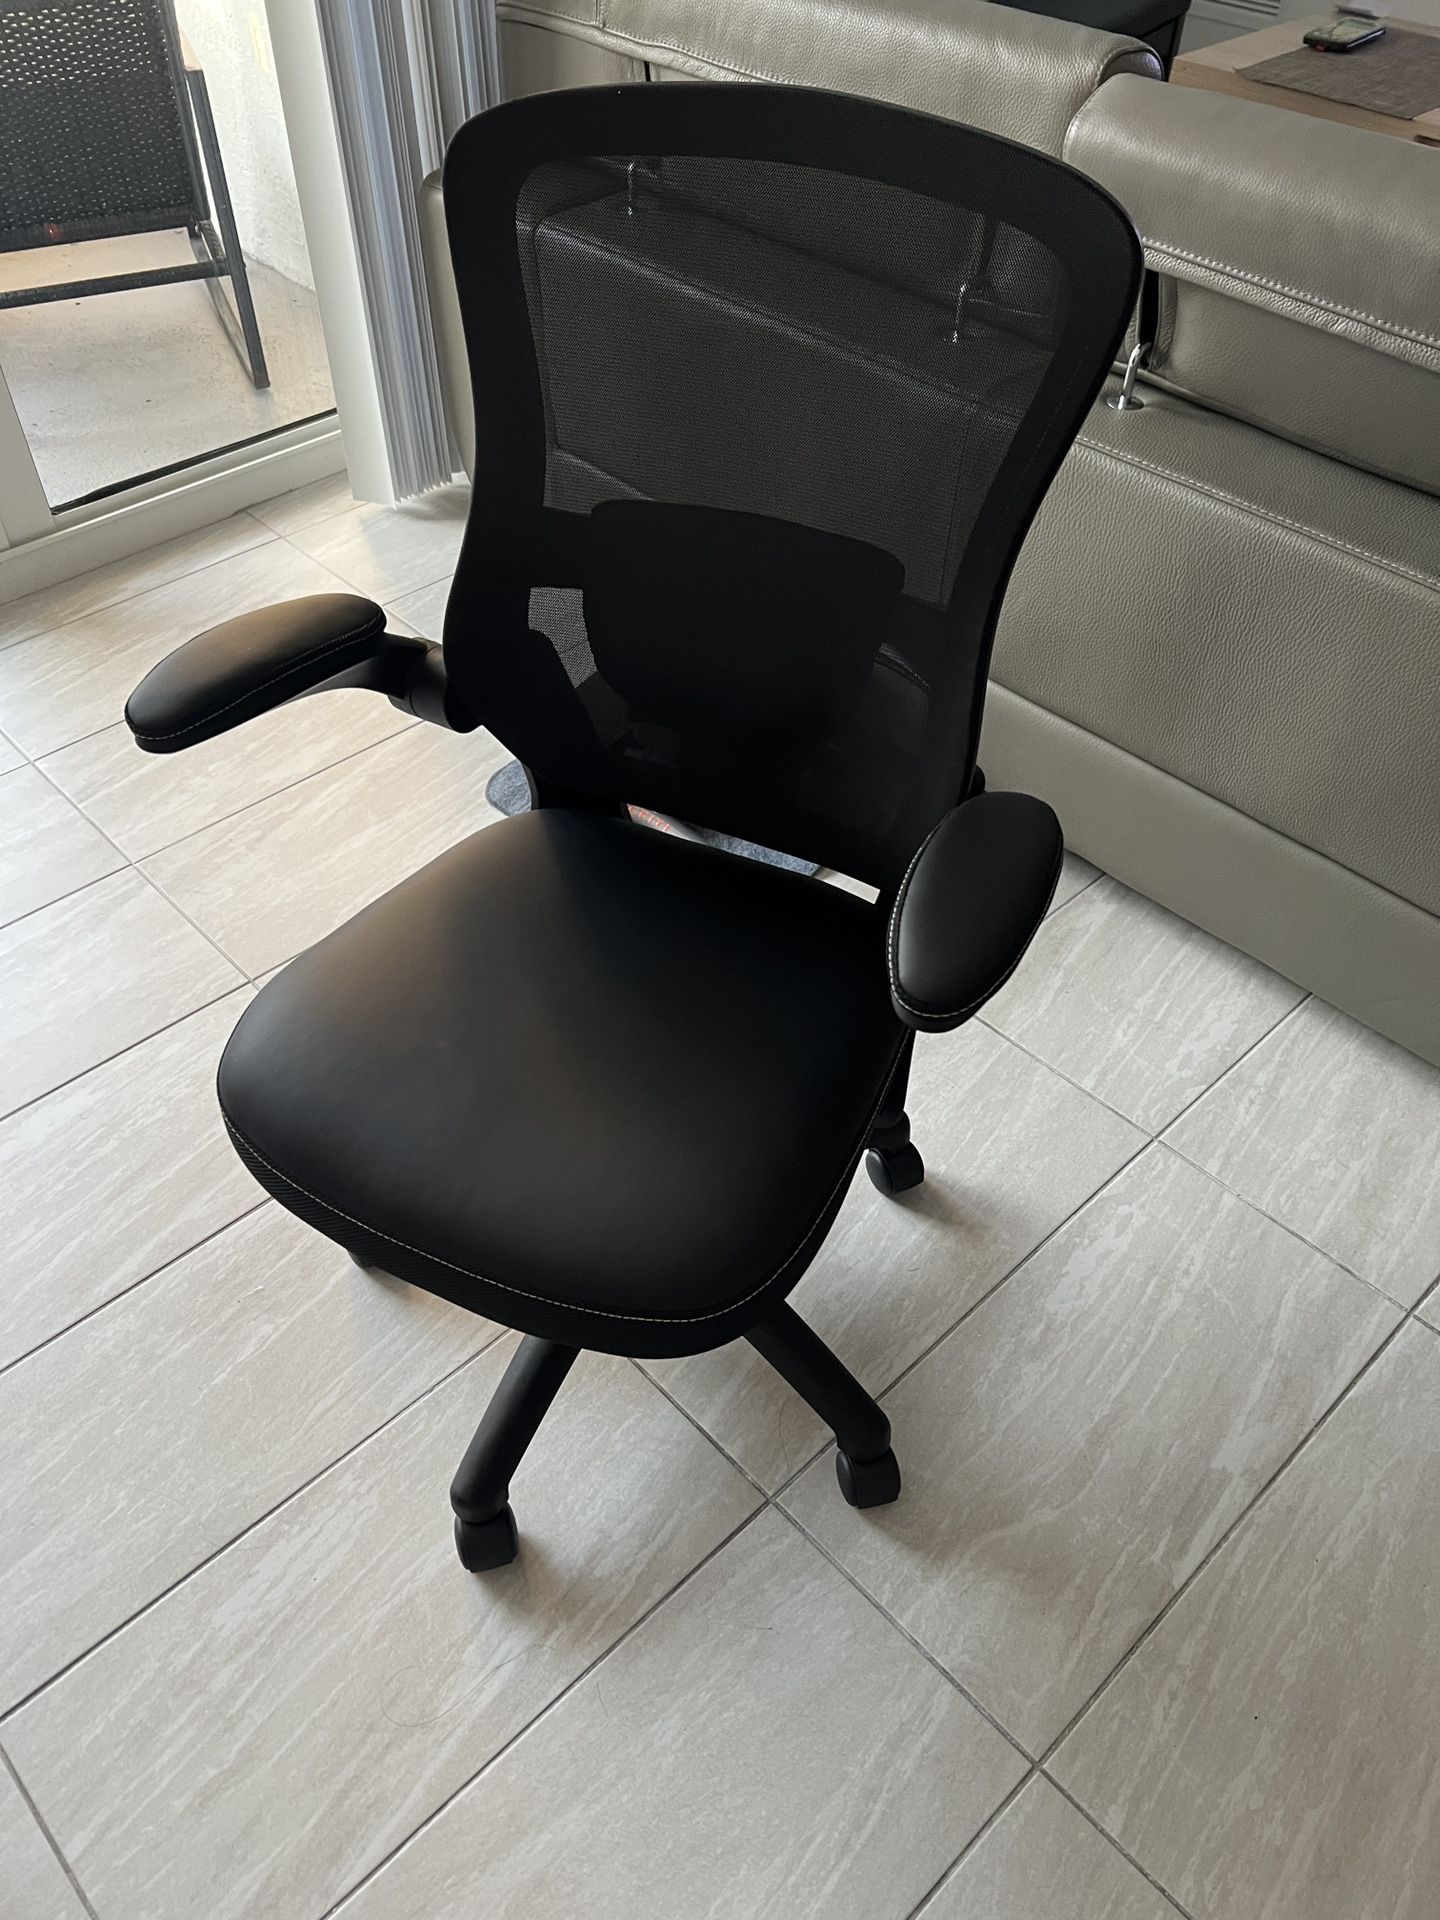 New and Never Used Adjustable Office Chair 